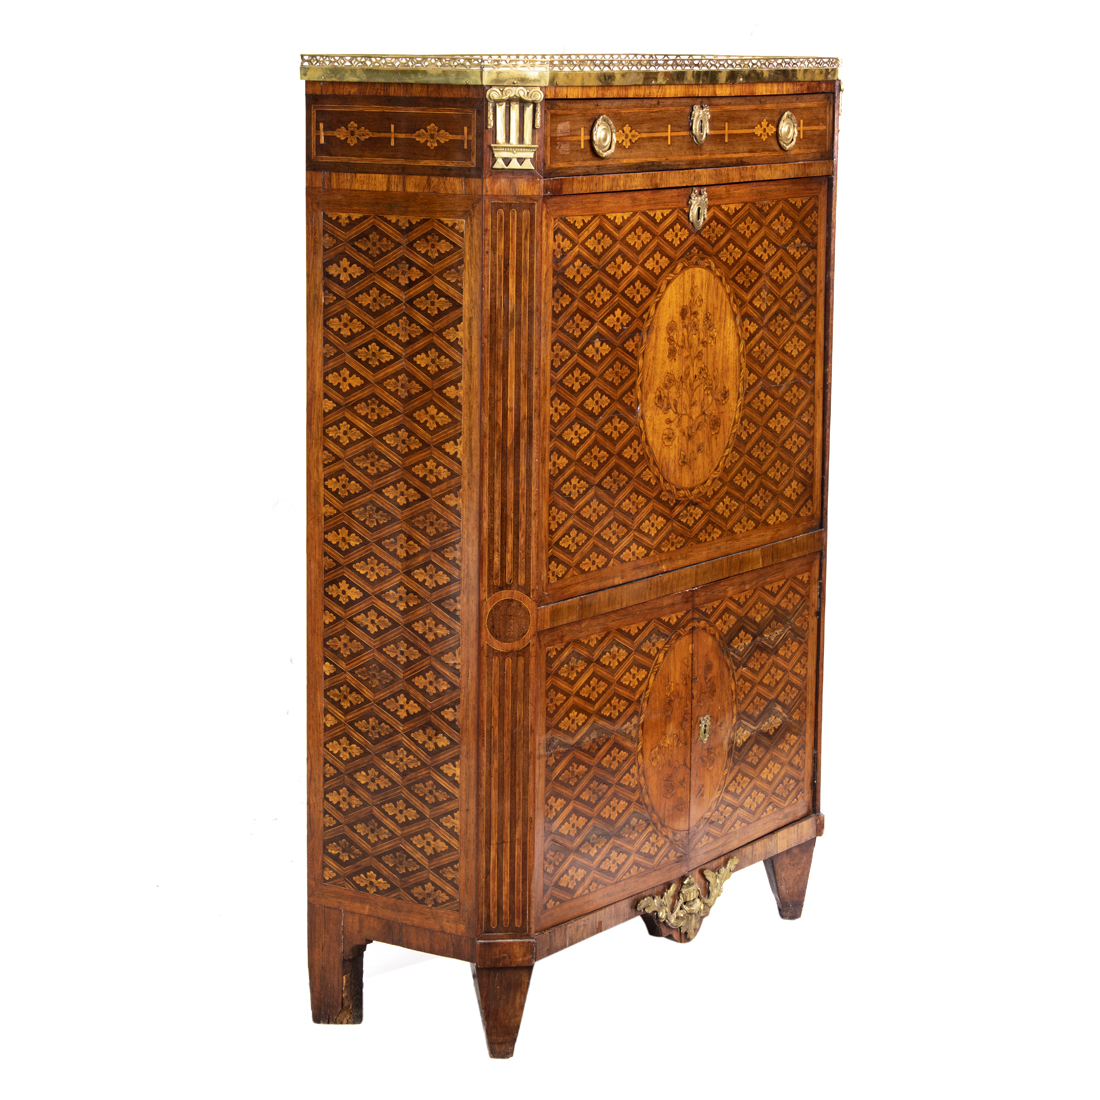 A FRENCH LOUIS PHILIPPE INLAID